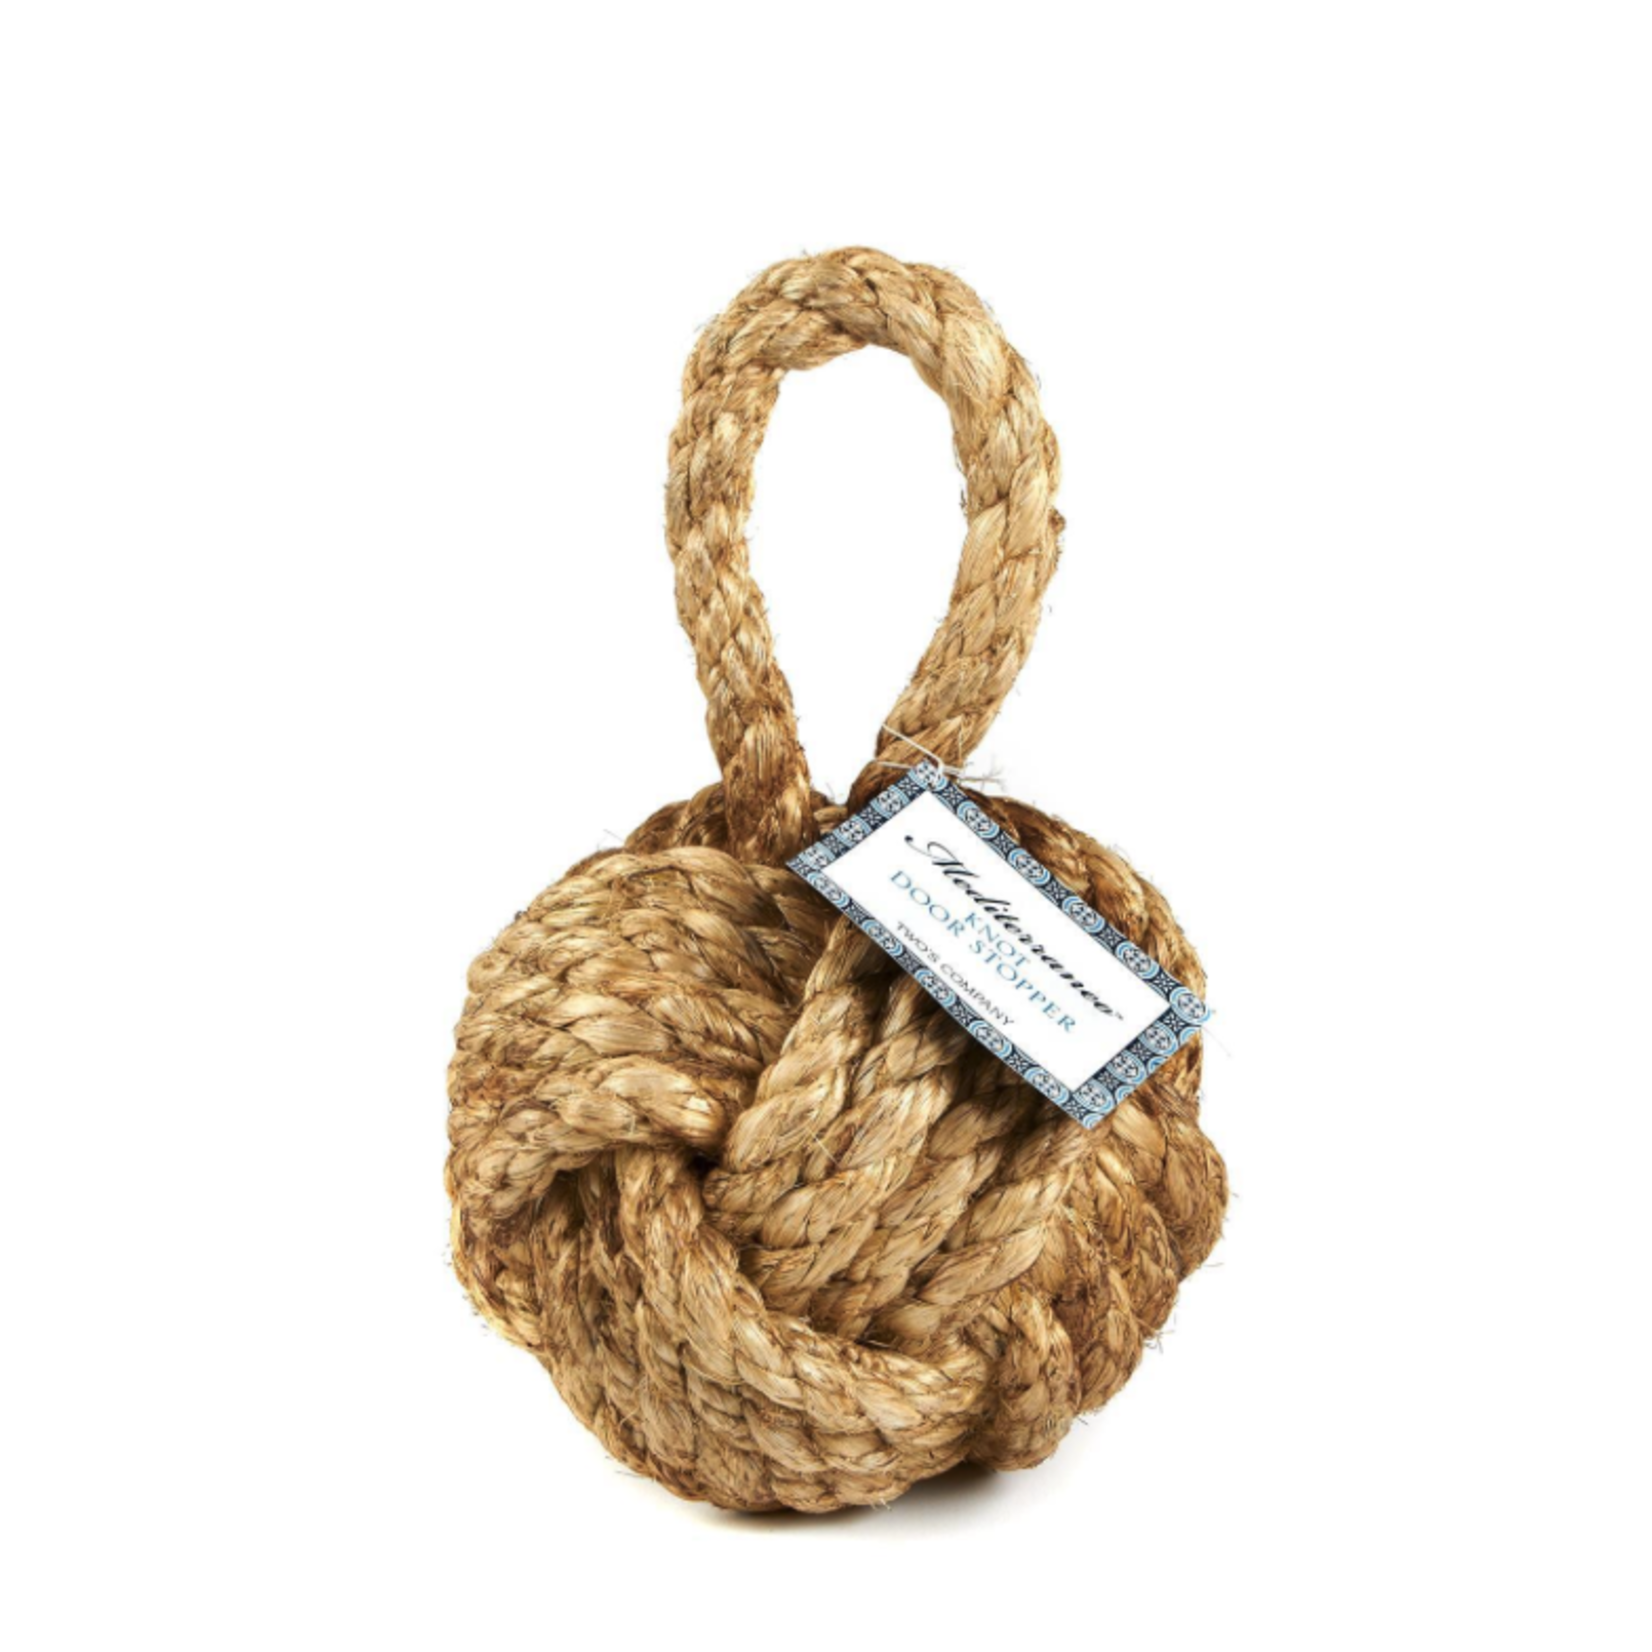 Outside The Box 6" Marseille Nautical Jute Knot Door Stopper